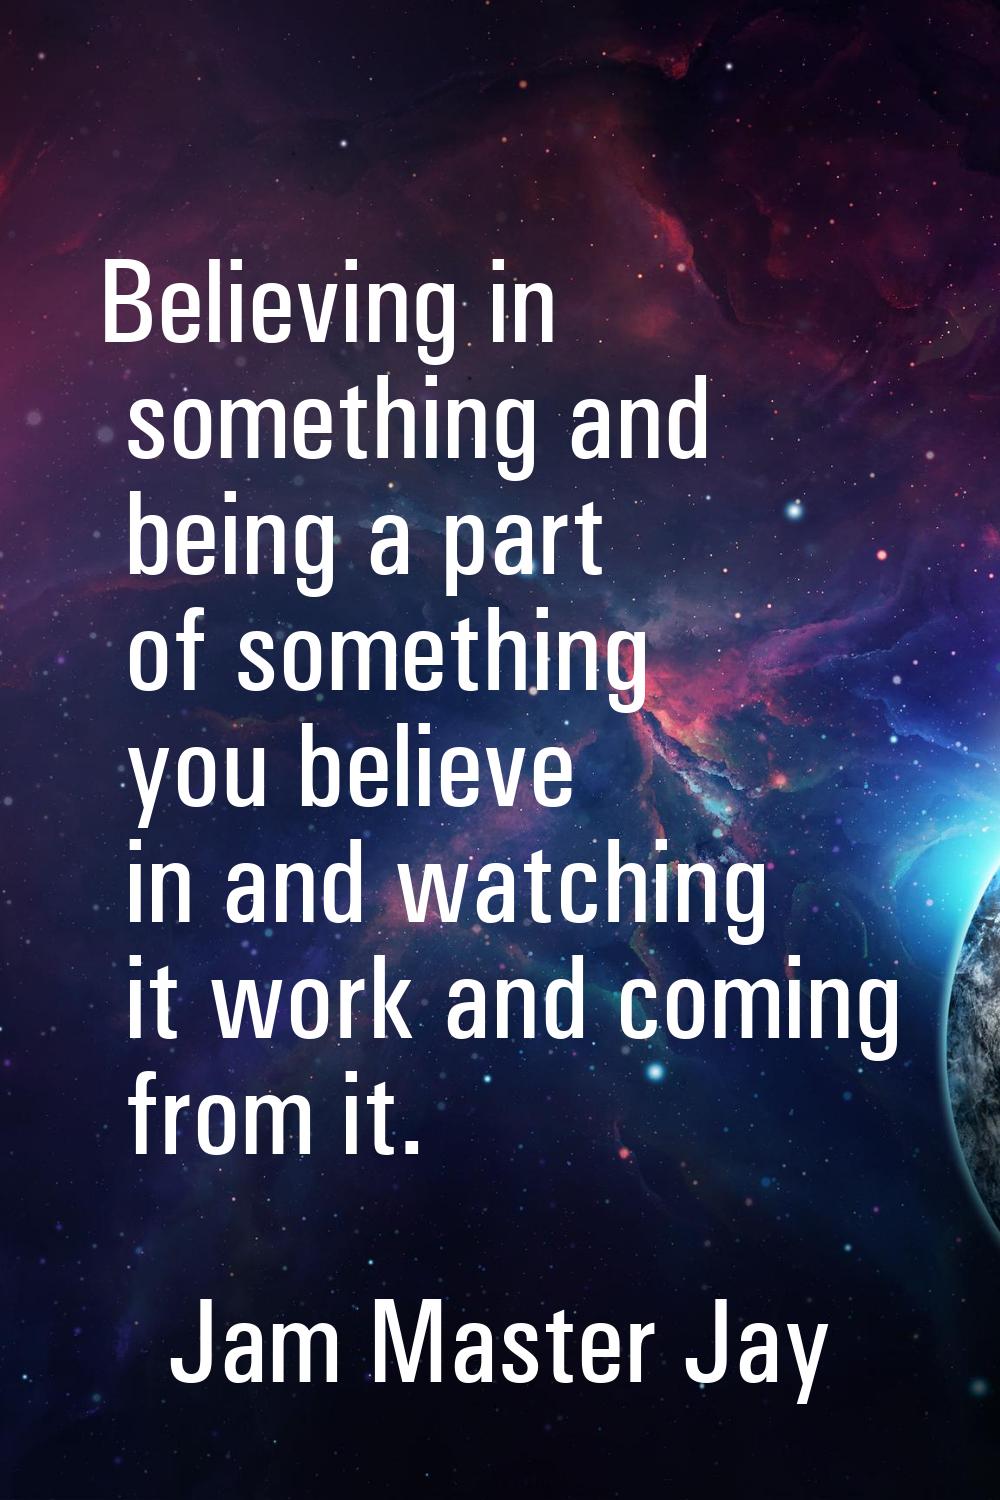 Believing in something and being a part of something you believe in and watching it work and coming